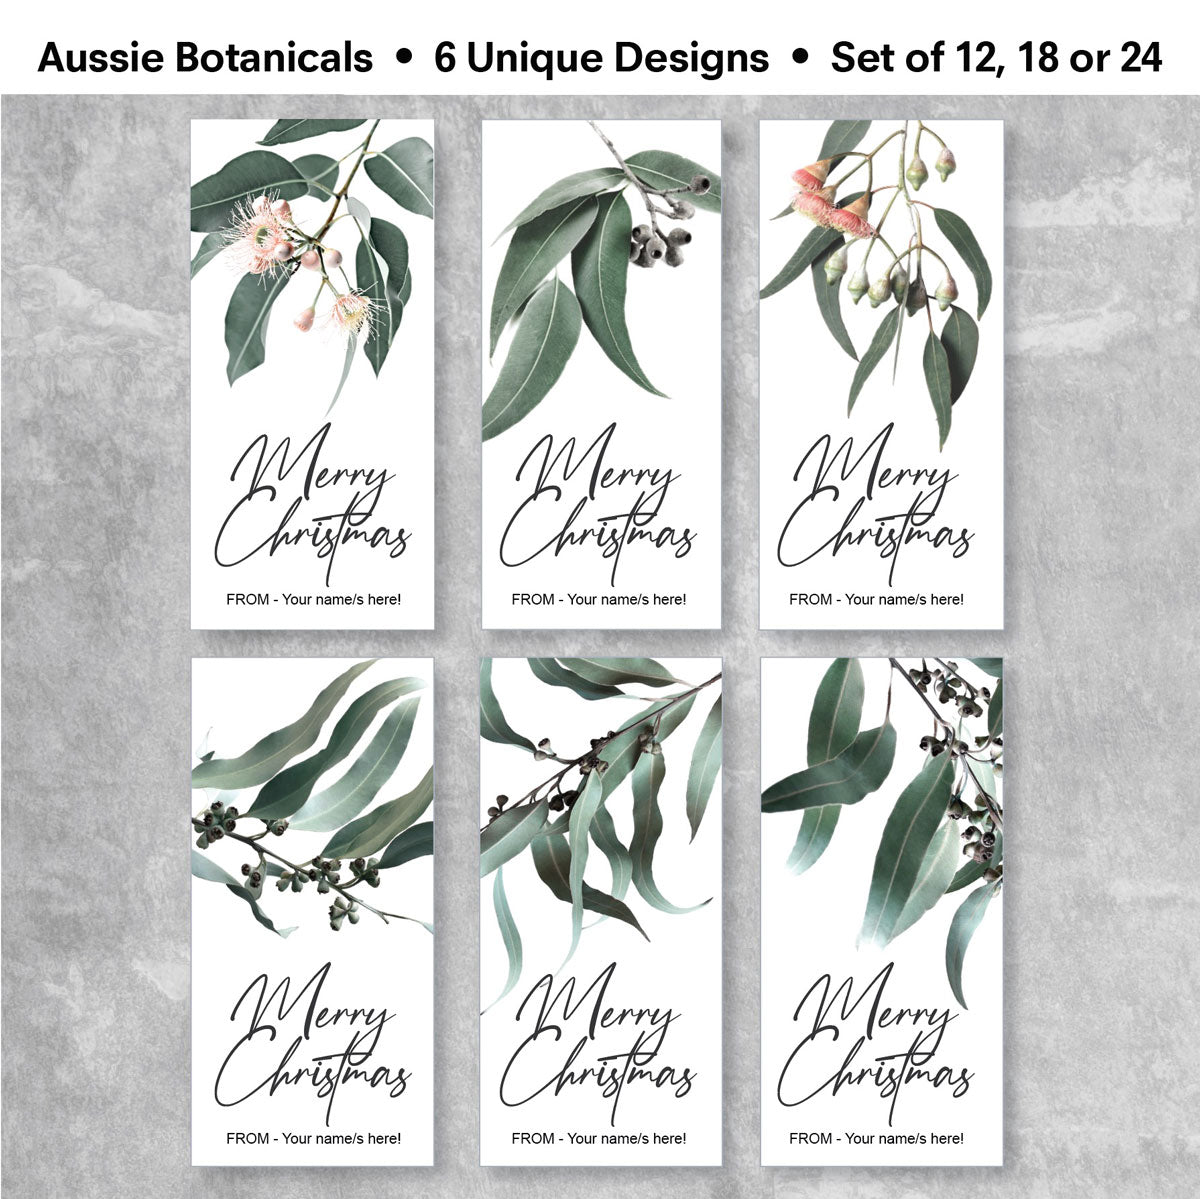 Christmas Gift Sticker featuring australian native botanicals - showing 6 designs you will receive in a set of 12, 18 or 24.